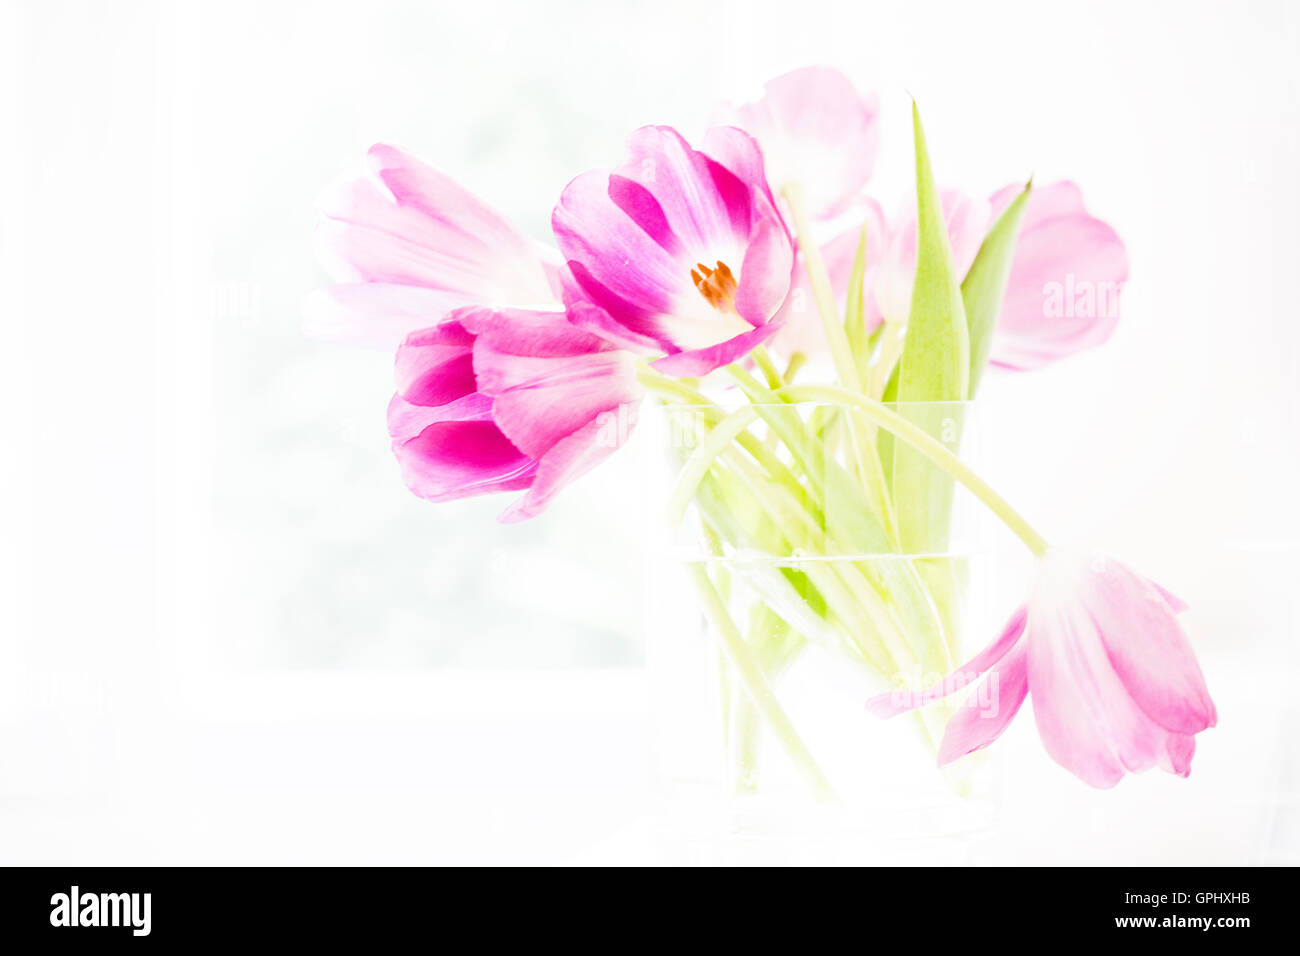 An arrangement of bright, pink tulips in a clear glass vase set against a white background. Stock Photo